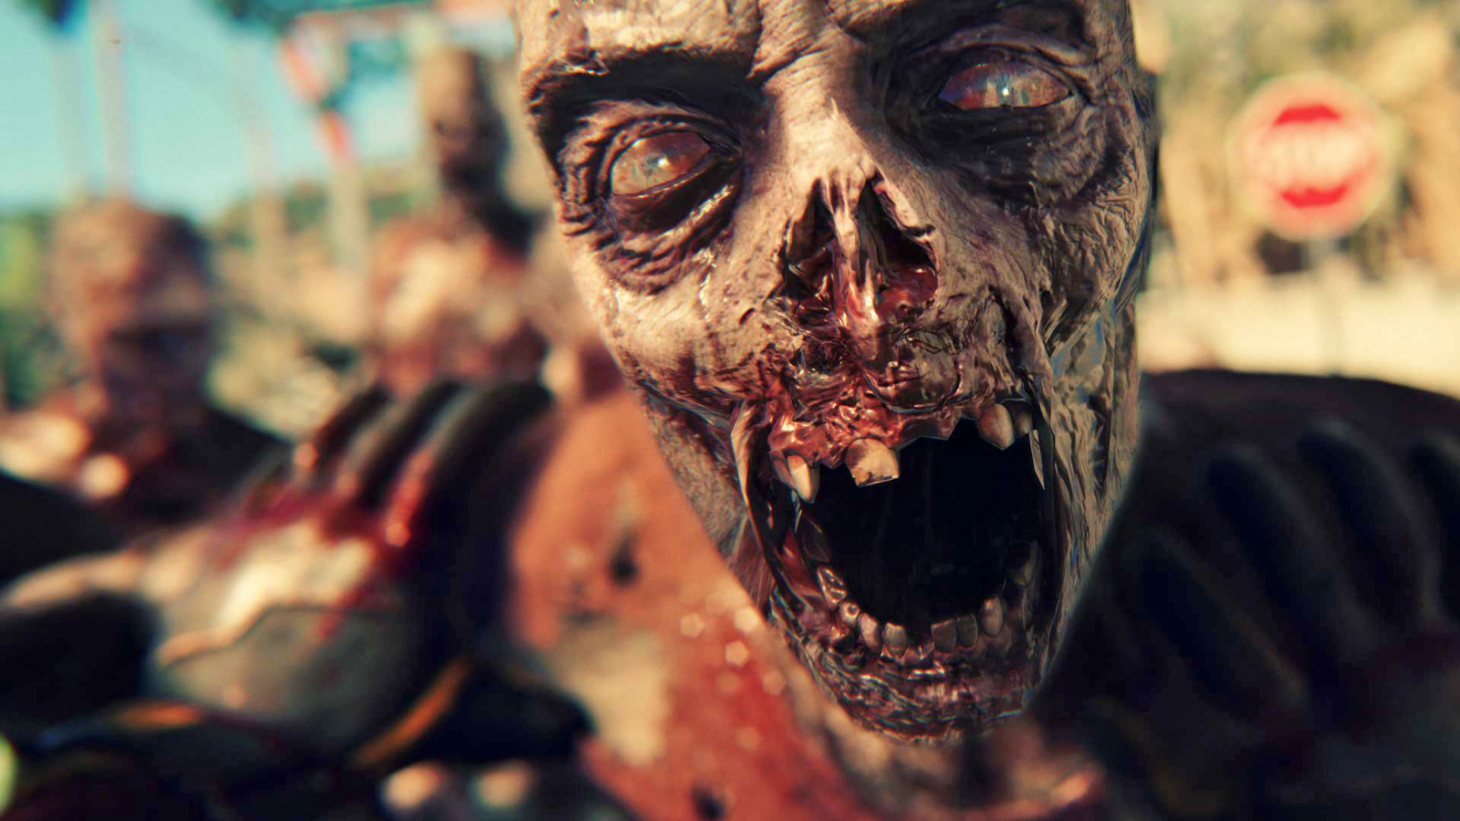 Dead Island Definitive Collection screens show off current-gen build